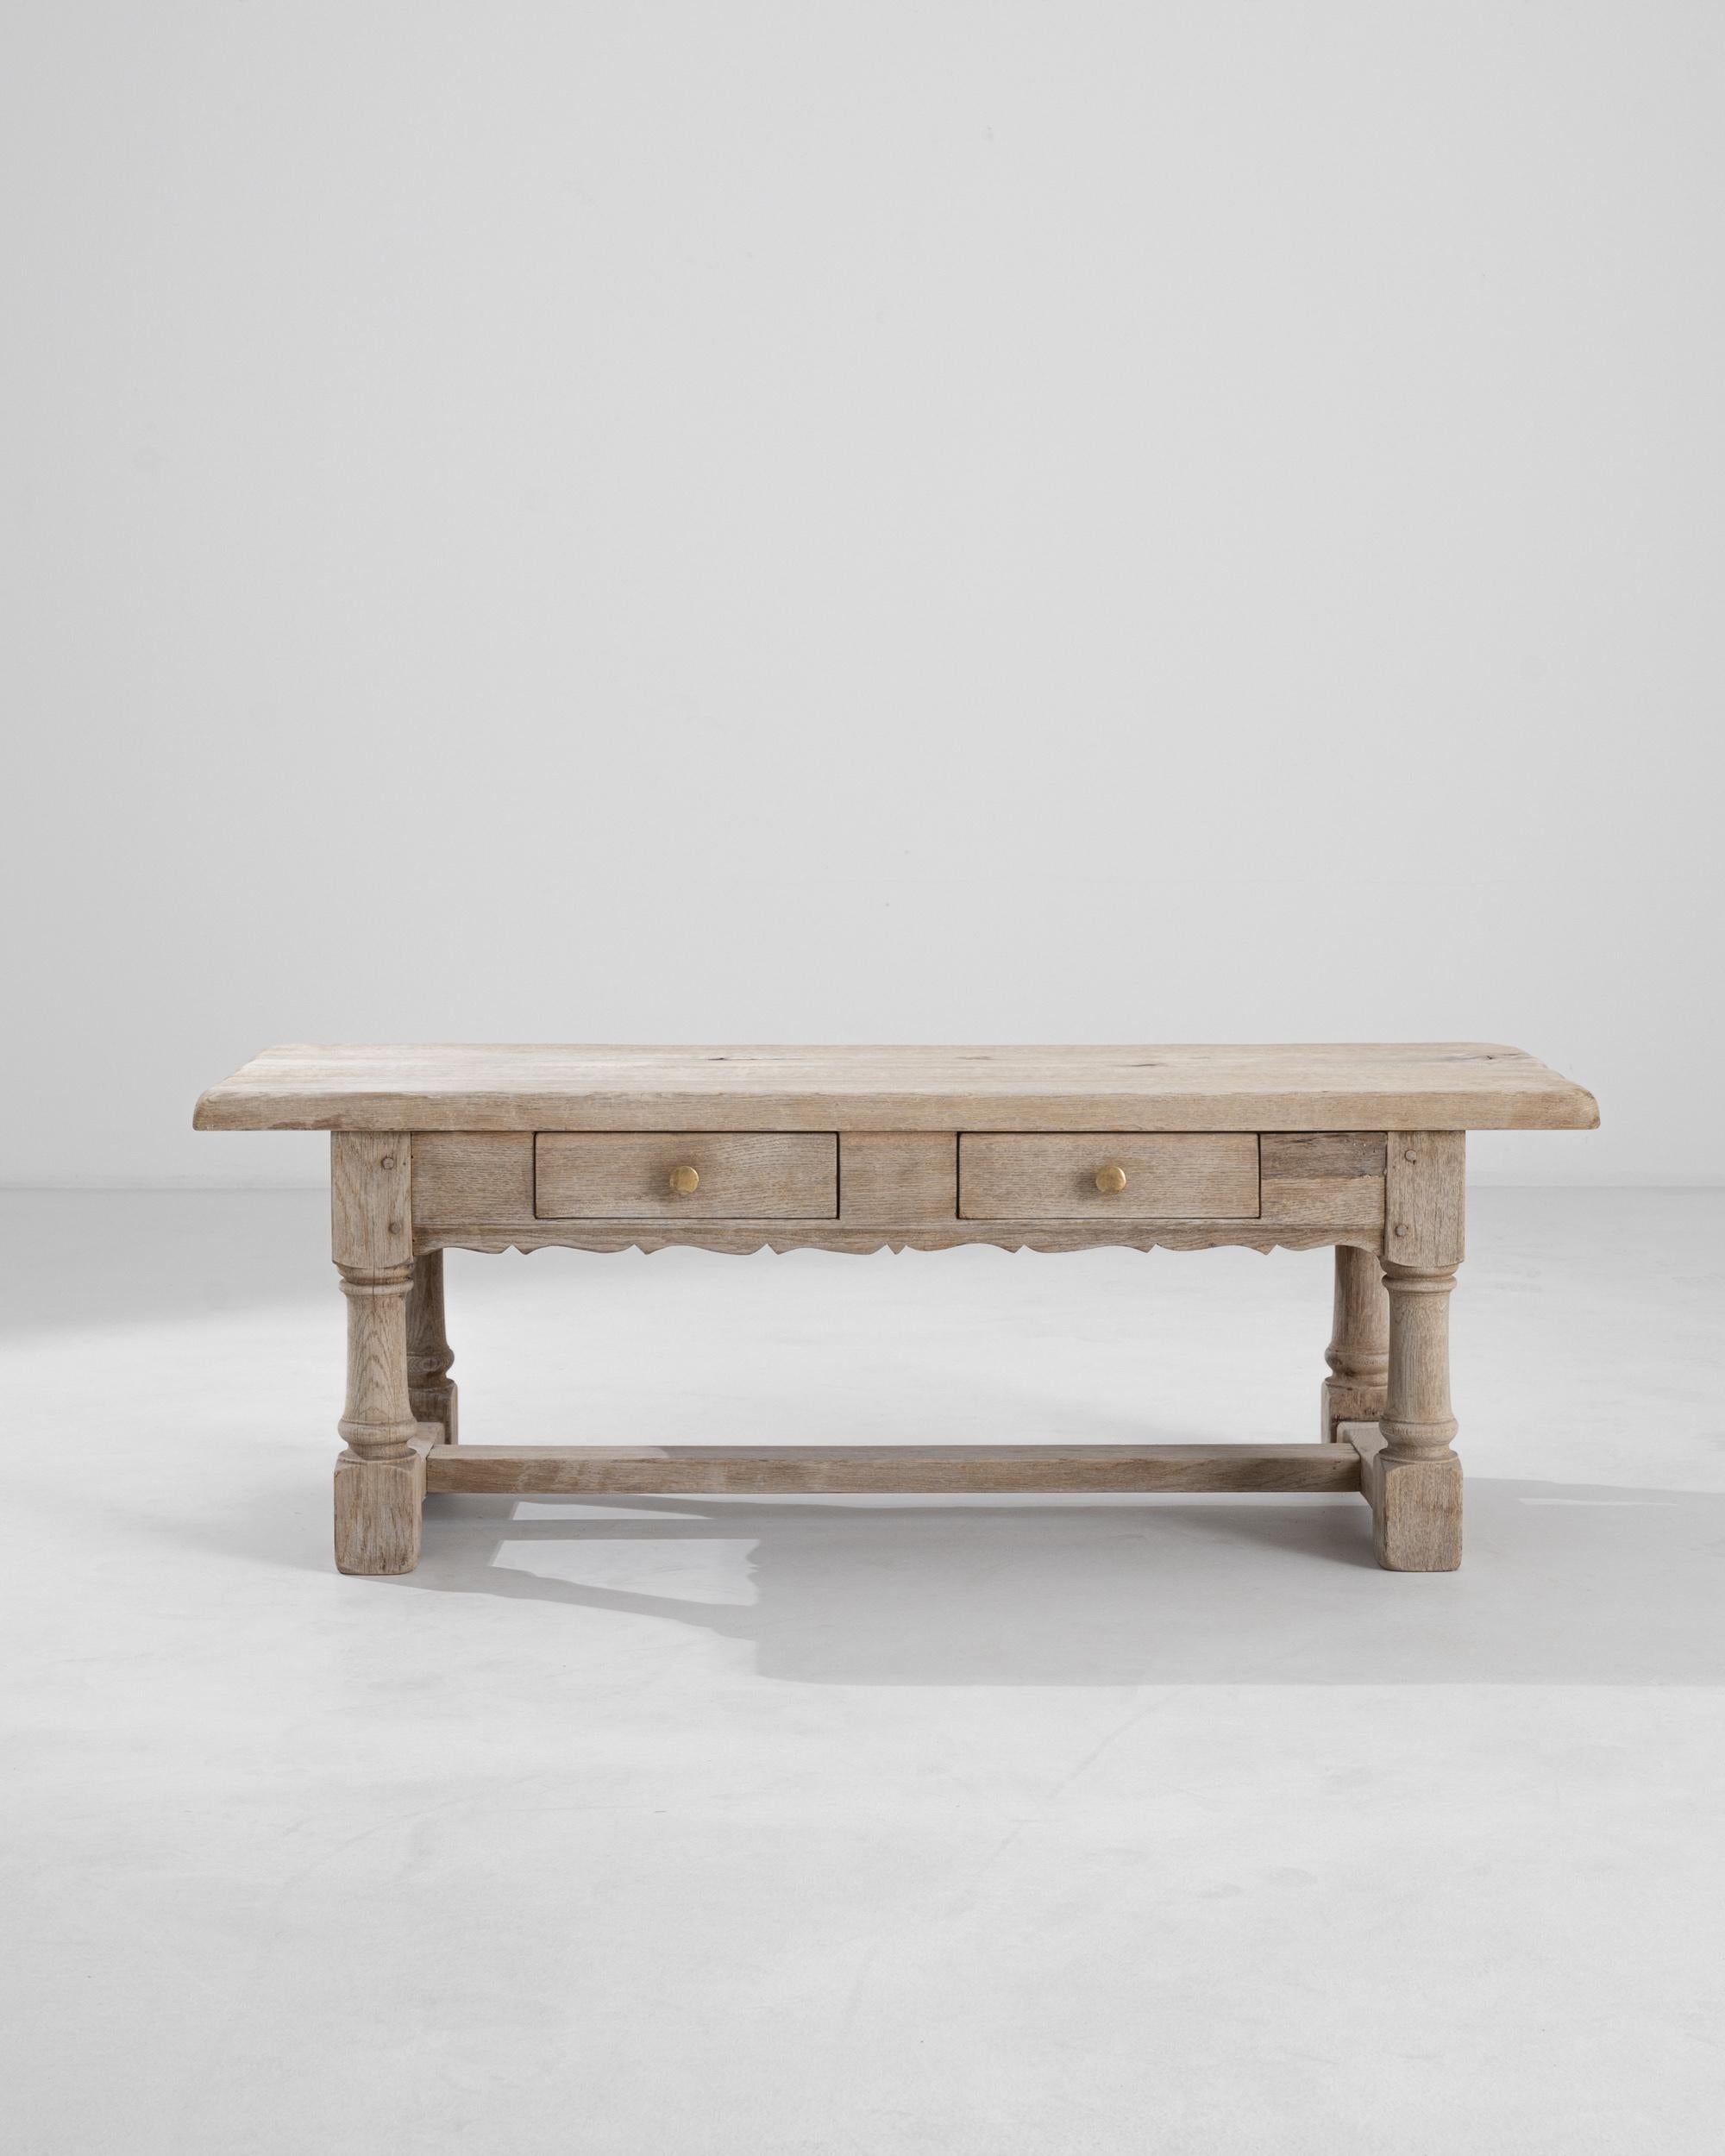 A bleached oak Belgian coffee table from the 20th century. In addition to an expansive table top, this coffee table also contains two large sliding drawers. Lathed legs, brass hardware, wooden pins, and hand-carved apron patterning all speak to the